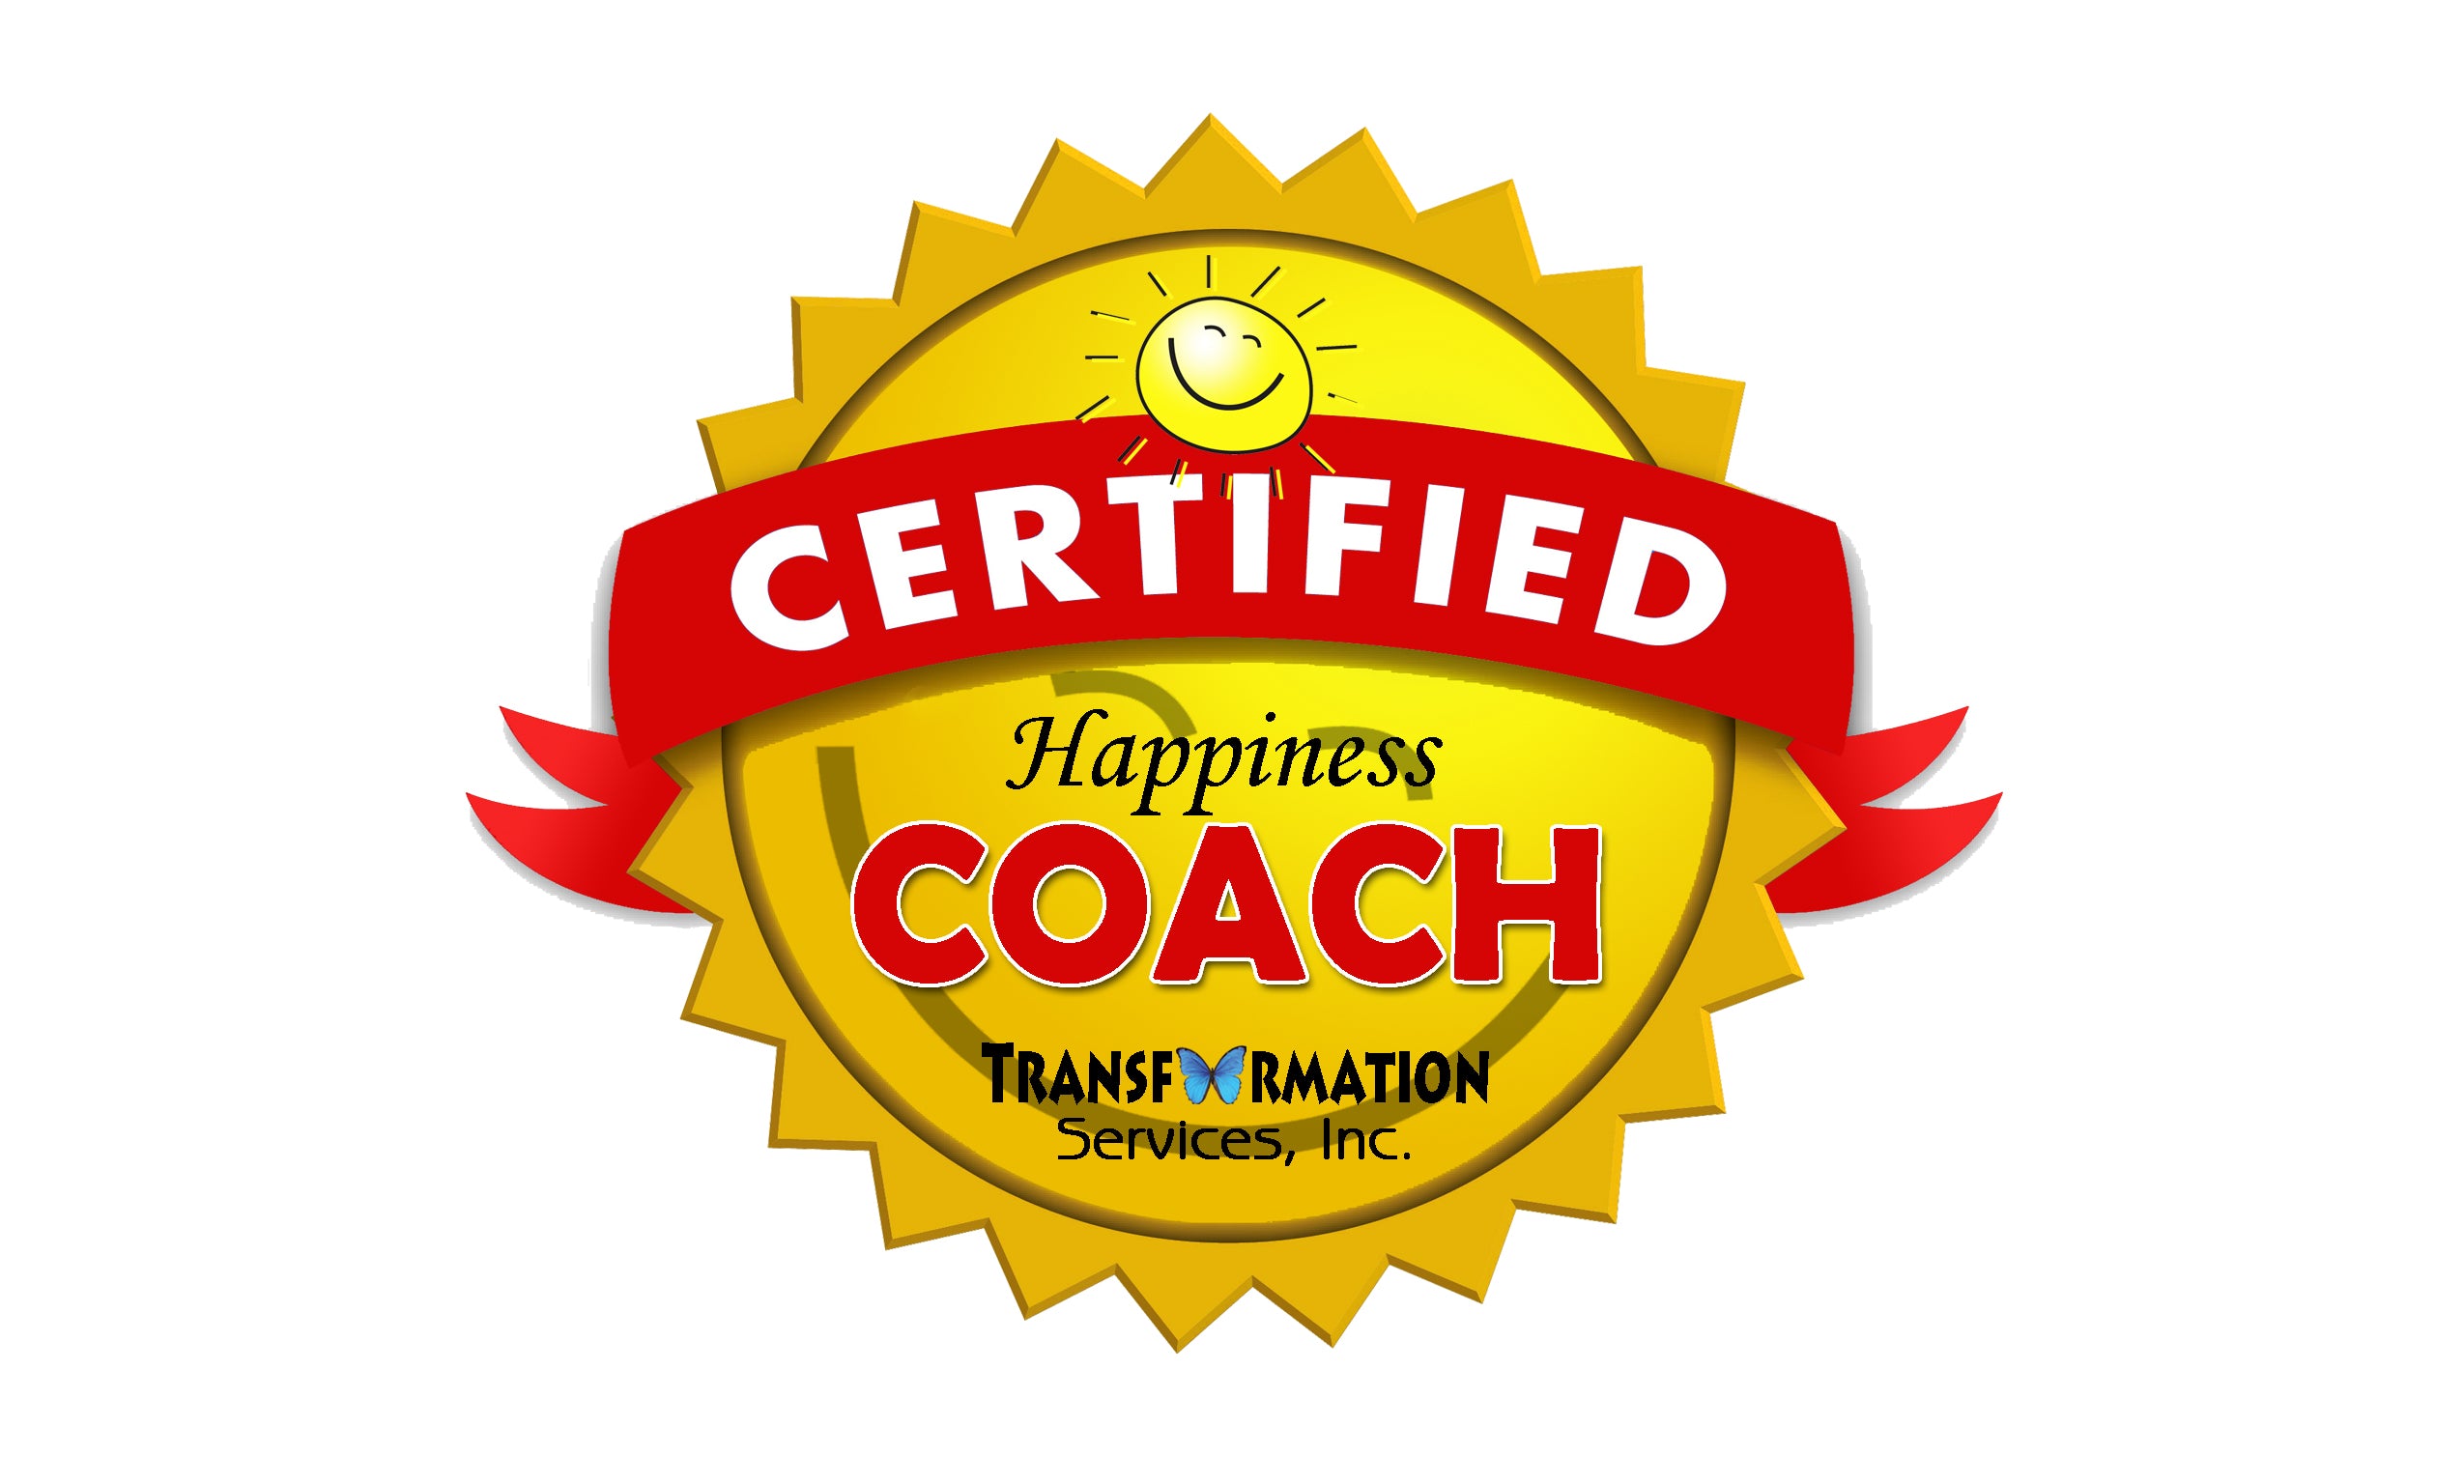 Happiness Life Coach Certification